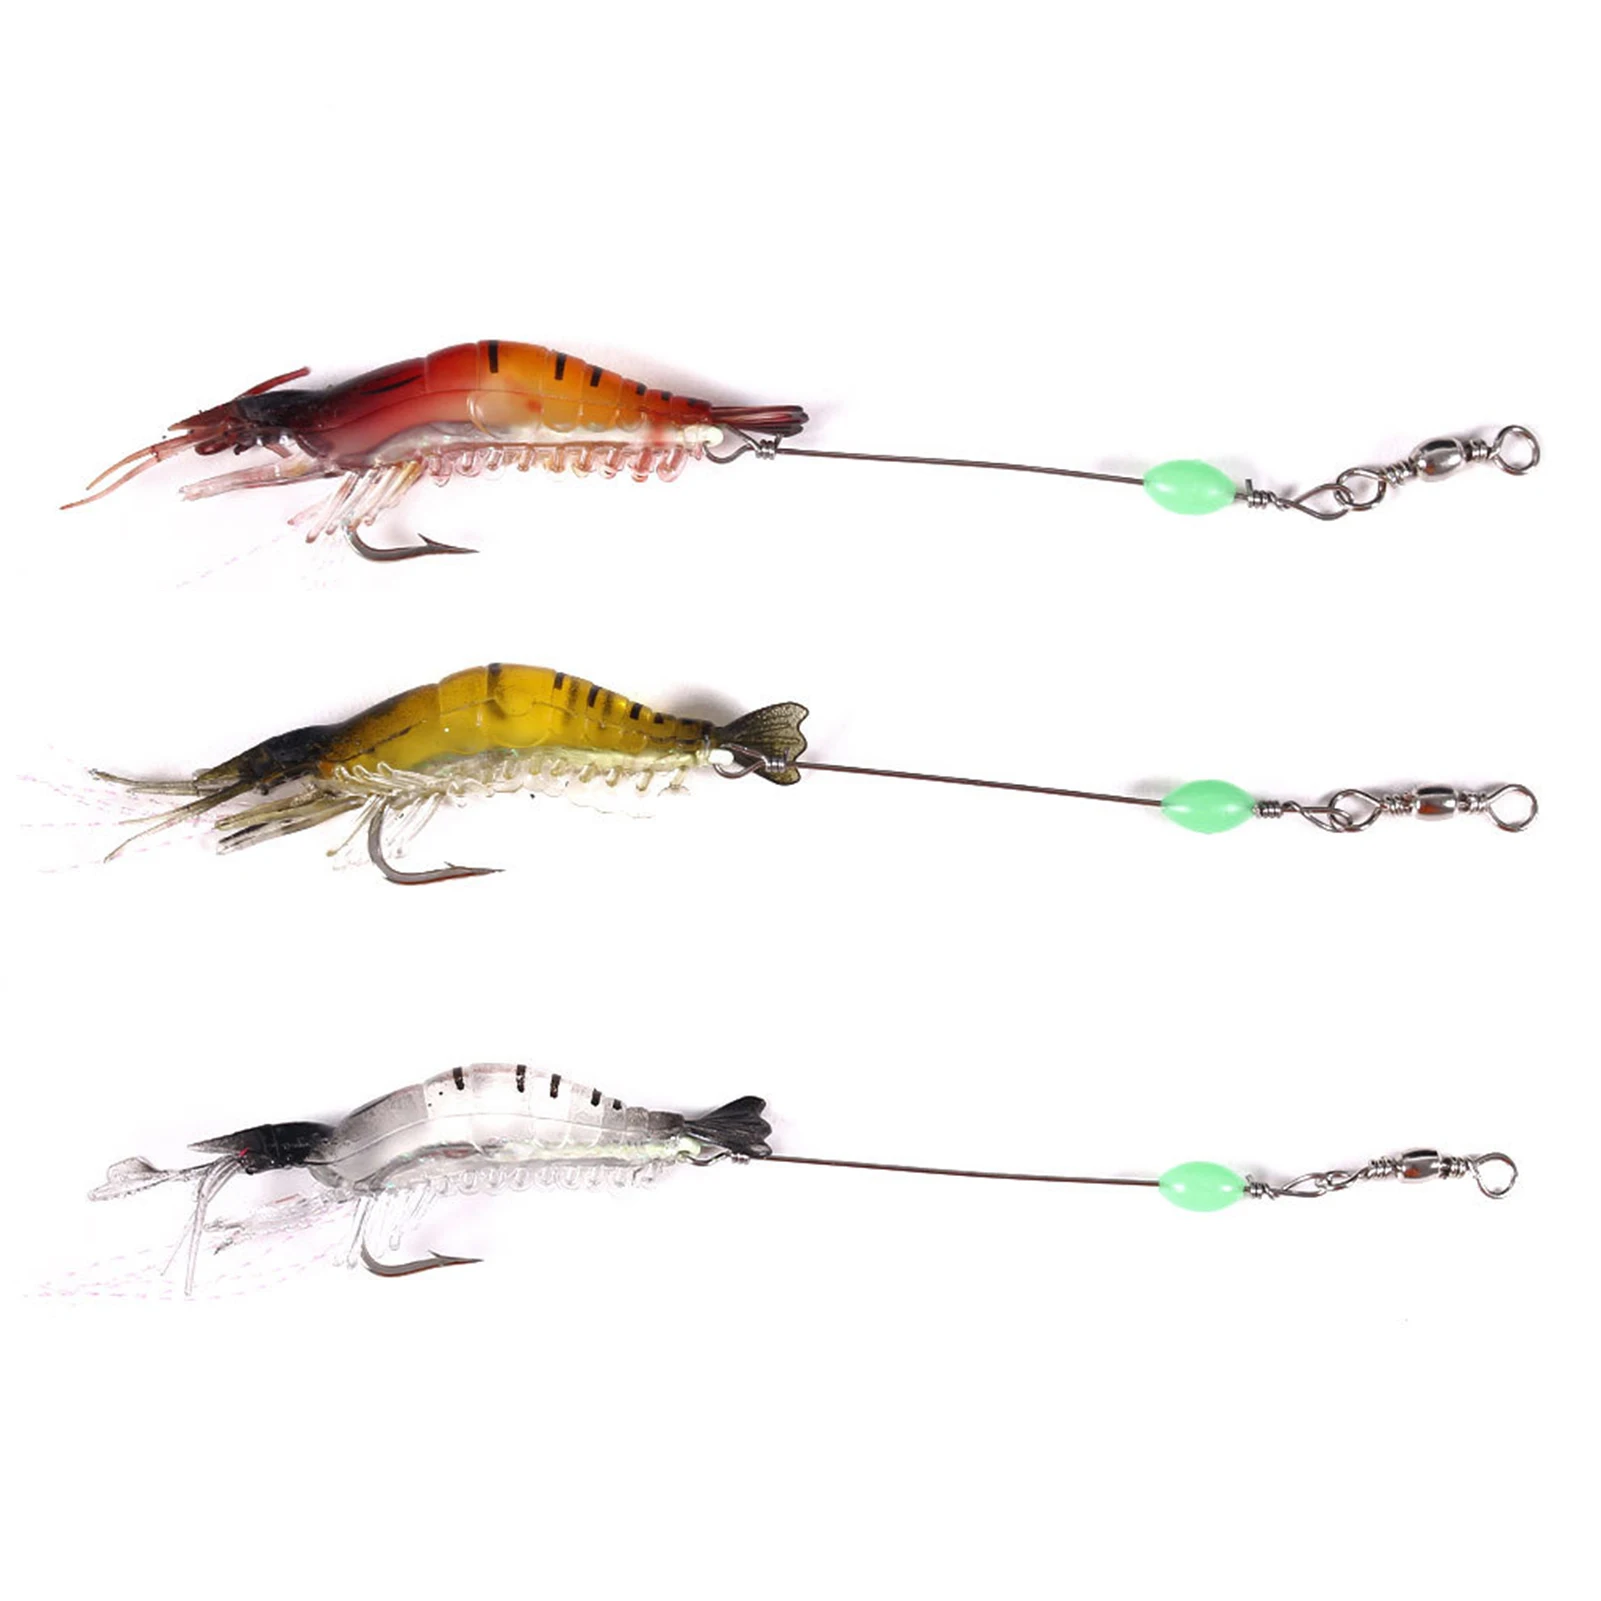 Luminous Shrimp Prawn Fishing Lures Saltwater Shrimp Baits Glowing Soft  Baits for Loaded Stocked Tackle XR-Hot - AliExpress